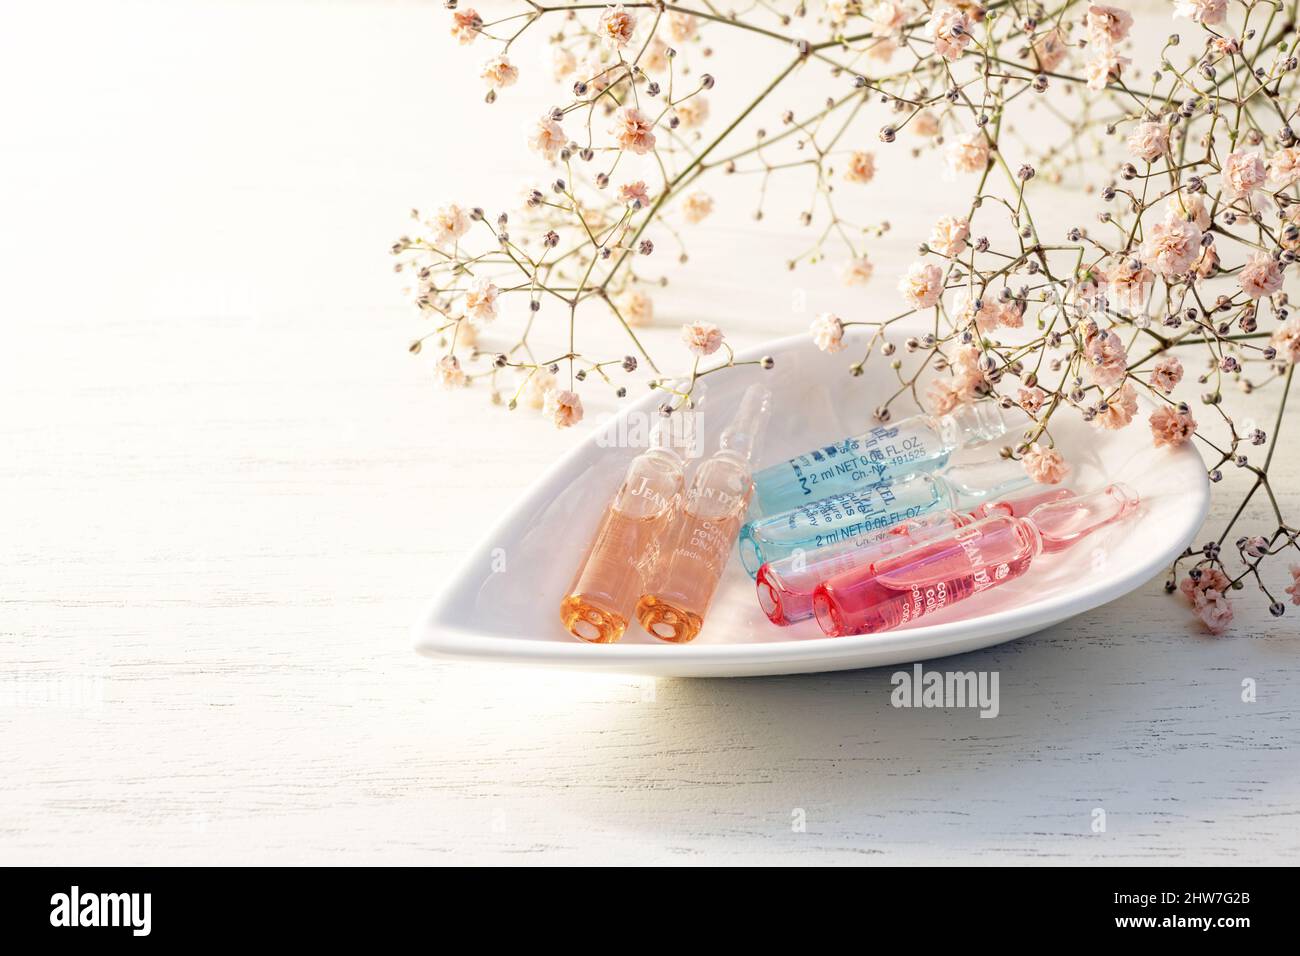 Lubeck, Germany, March 03, 2021: Ampoules from Jean d Arcel for luxurious cosmetic beauty treatment in a bowl, blush gypsophila flowers and bright bac Stock Photo